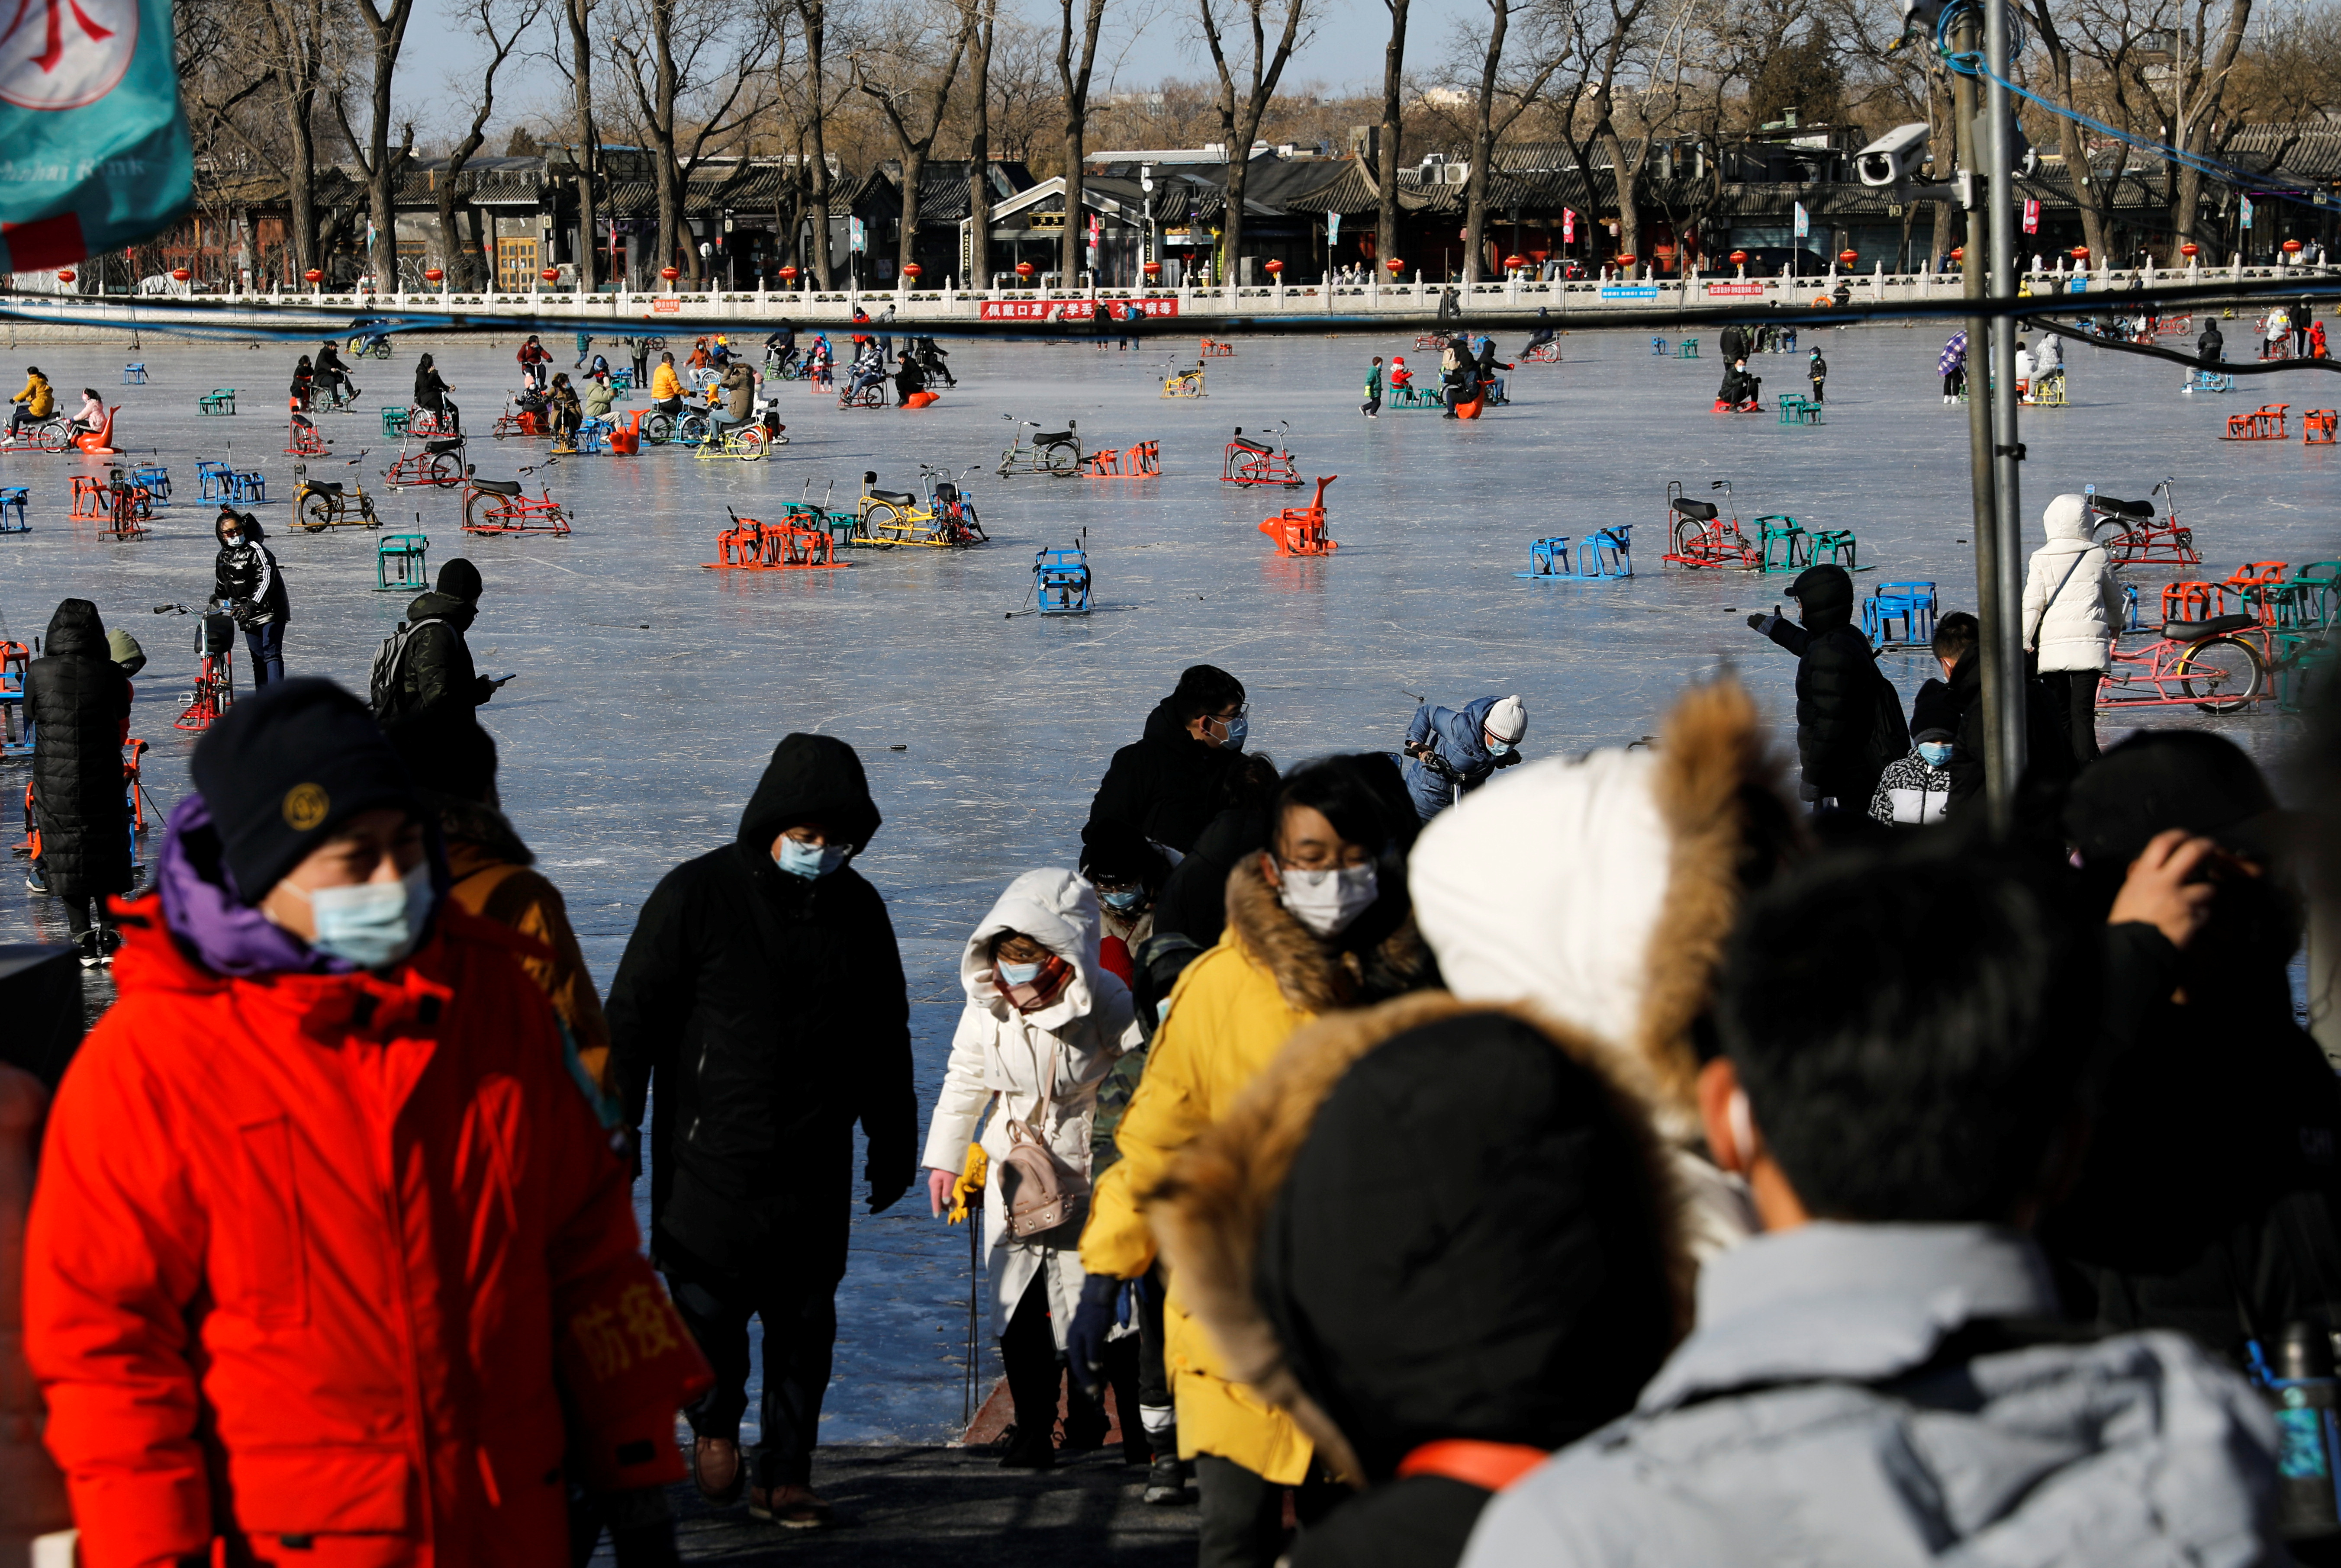 People wearing face masks stand at the entrance of a frozen lake which has been turned to an ice rink, following the coronavirus disease (COVID-19) outbreak, in Beijing, China January 16, 2021. REUTERS/Tingshu Wang